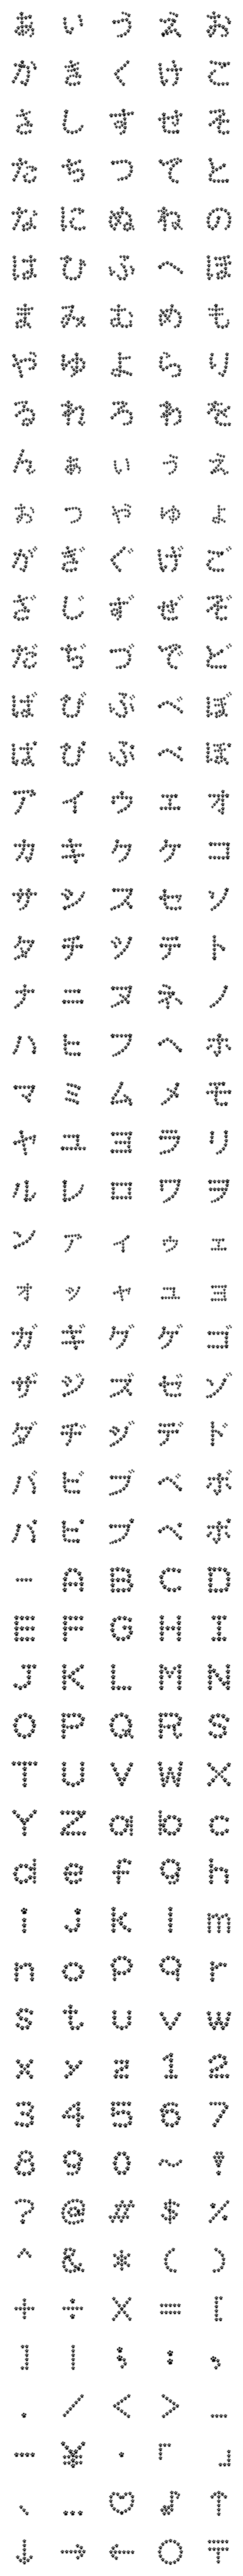 [LINE絵文字]Cat Fonts Emoji (Japanese and English)の画像一覧